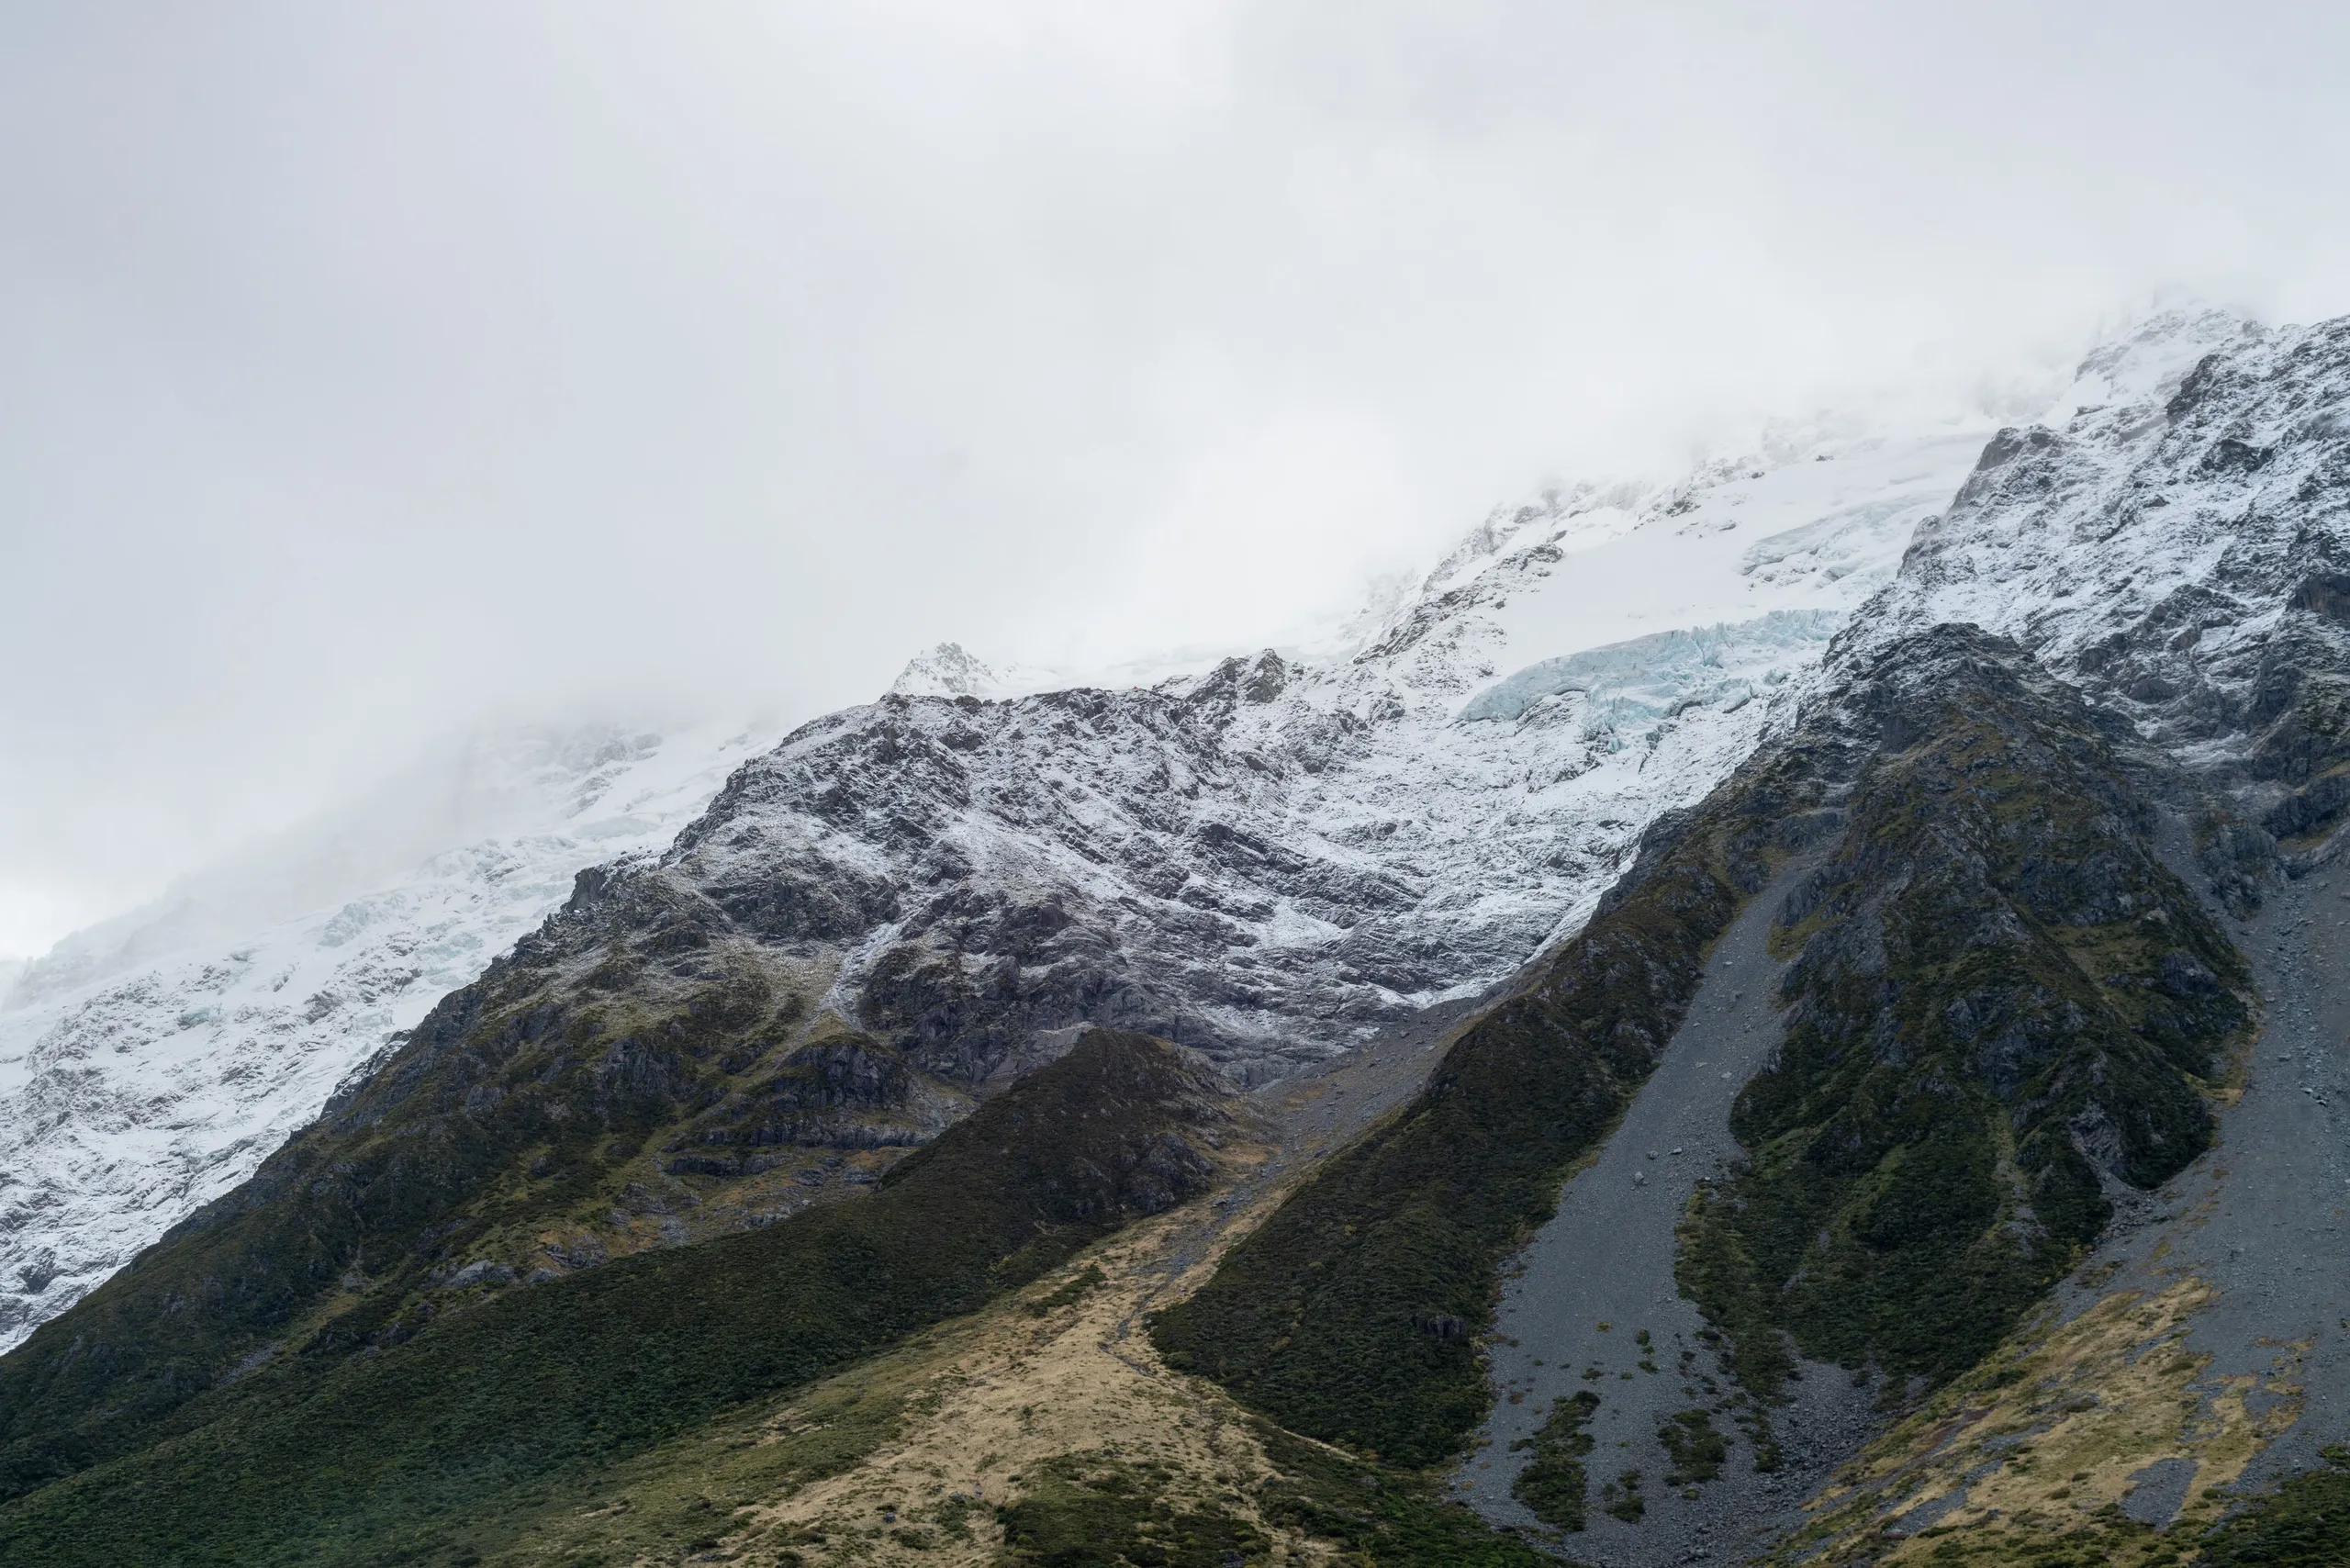 Looking up to Mt Sefton. An ominous shelf of ice is present and so too is Sefton Bivouac, merely a few red pixels in this image (click for higher resolution).